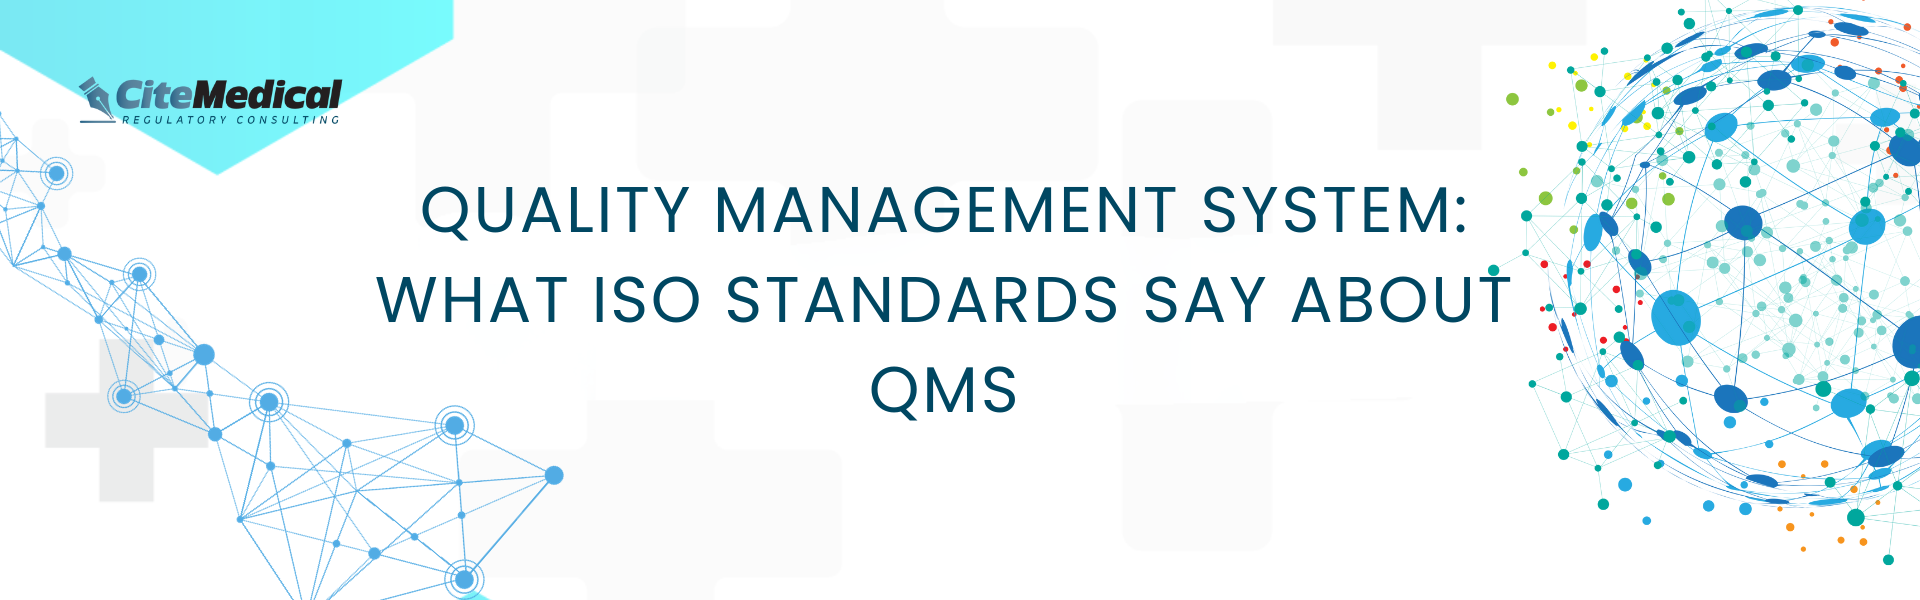 Quality Management System: What ISO Standards Say About QMS